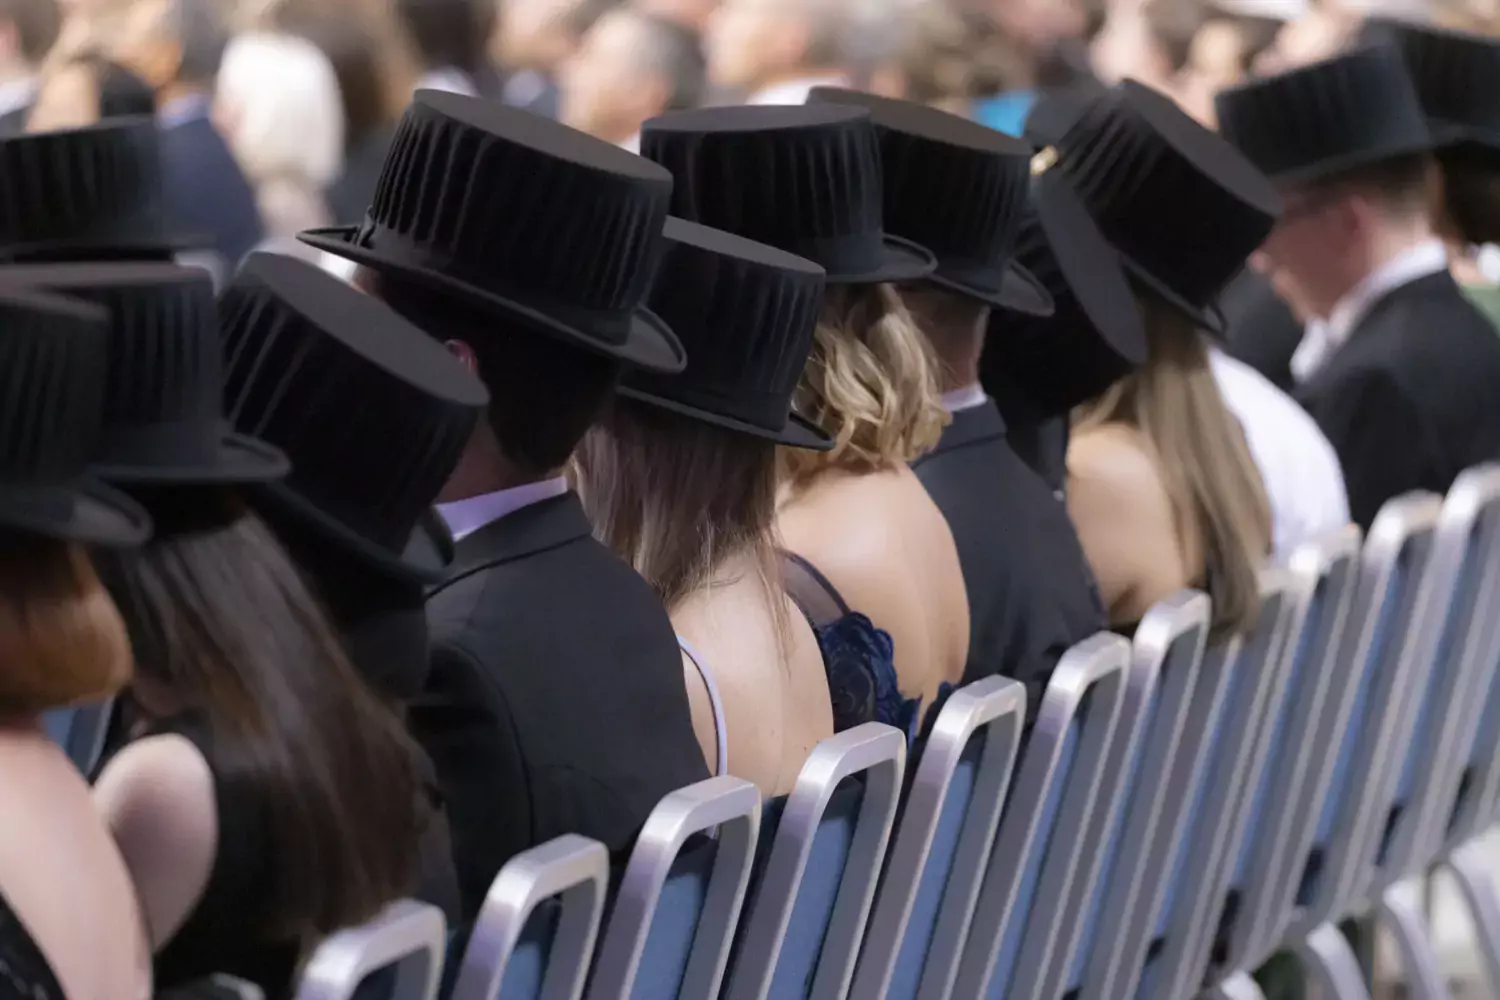 PhD's with their doctoral hats on sits in a row with their backs against the camera.